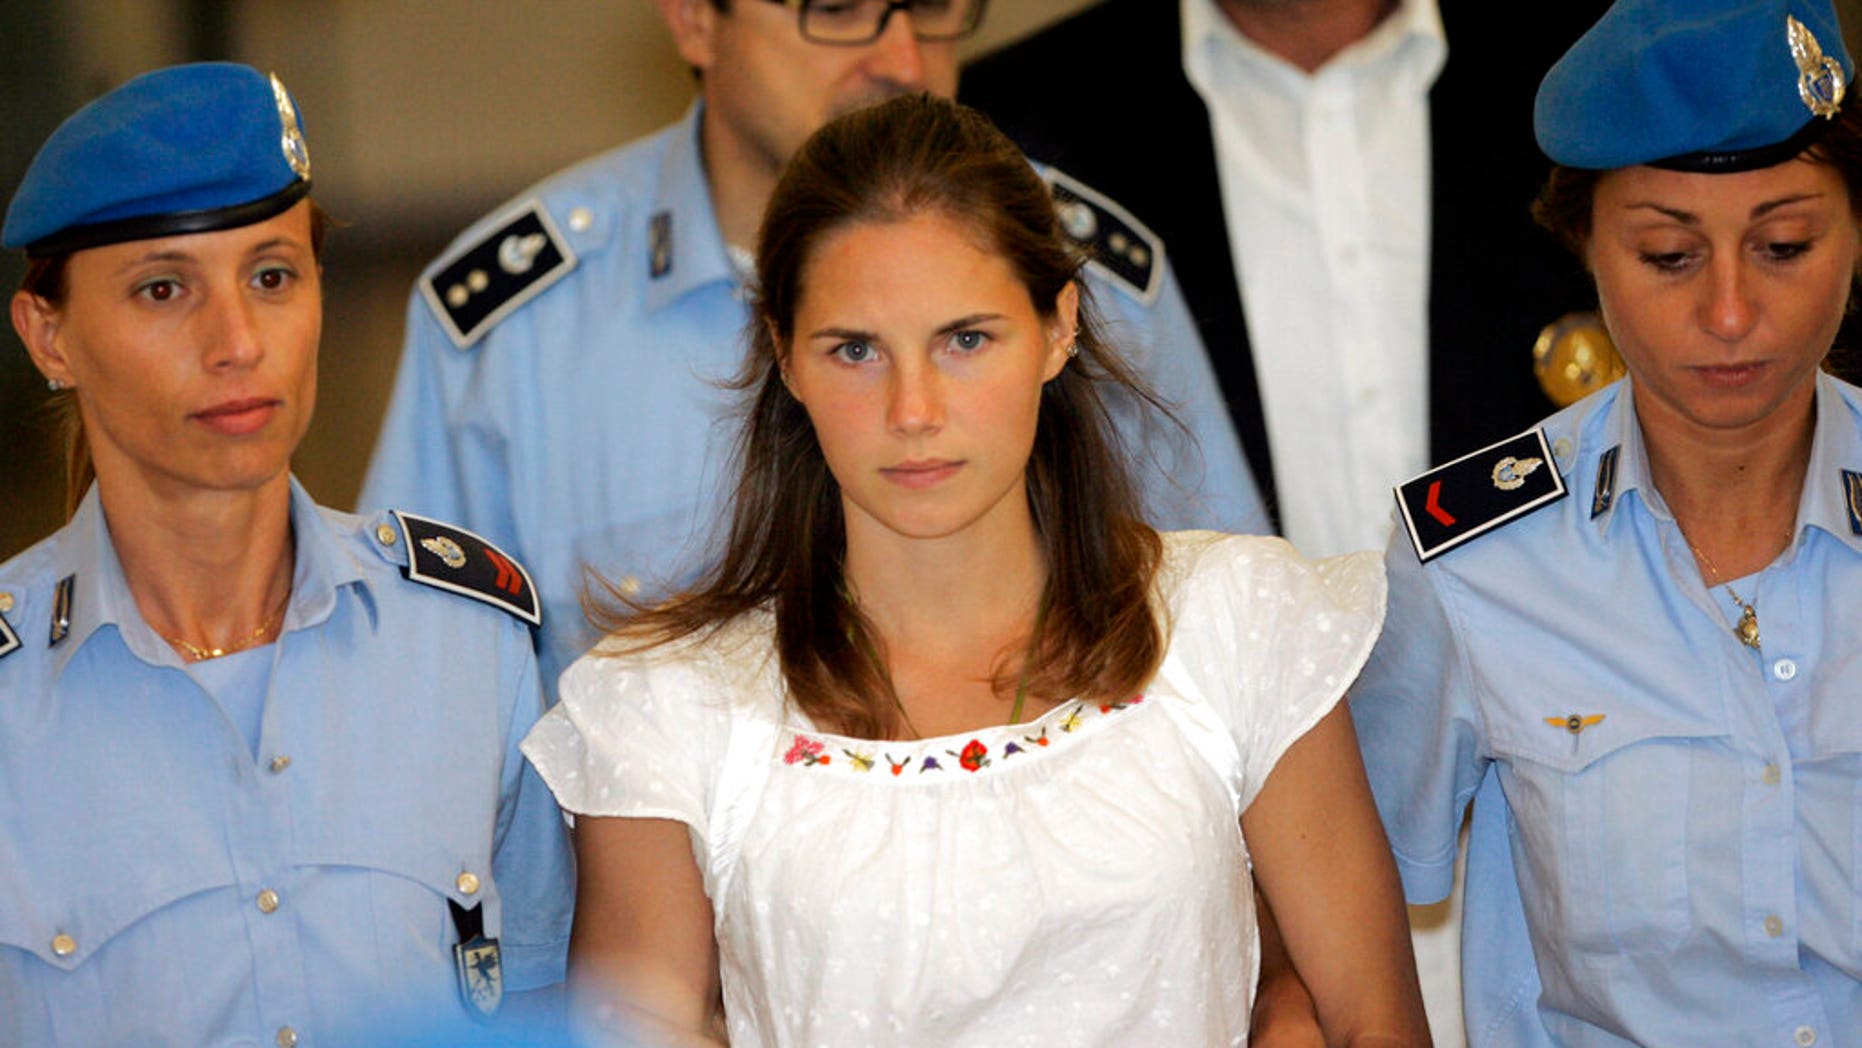 Europe court orders Italy to pay Amanda Knox $20G in damages